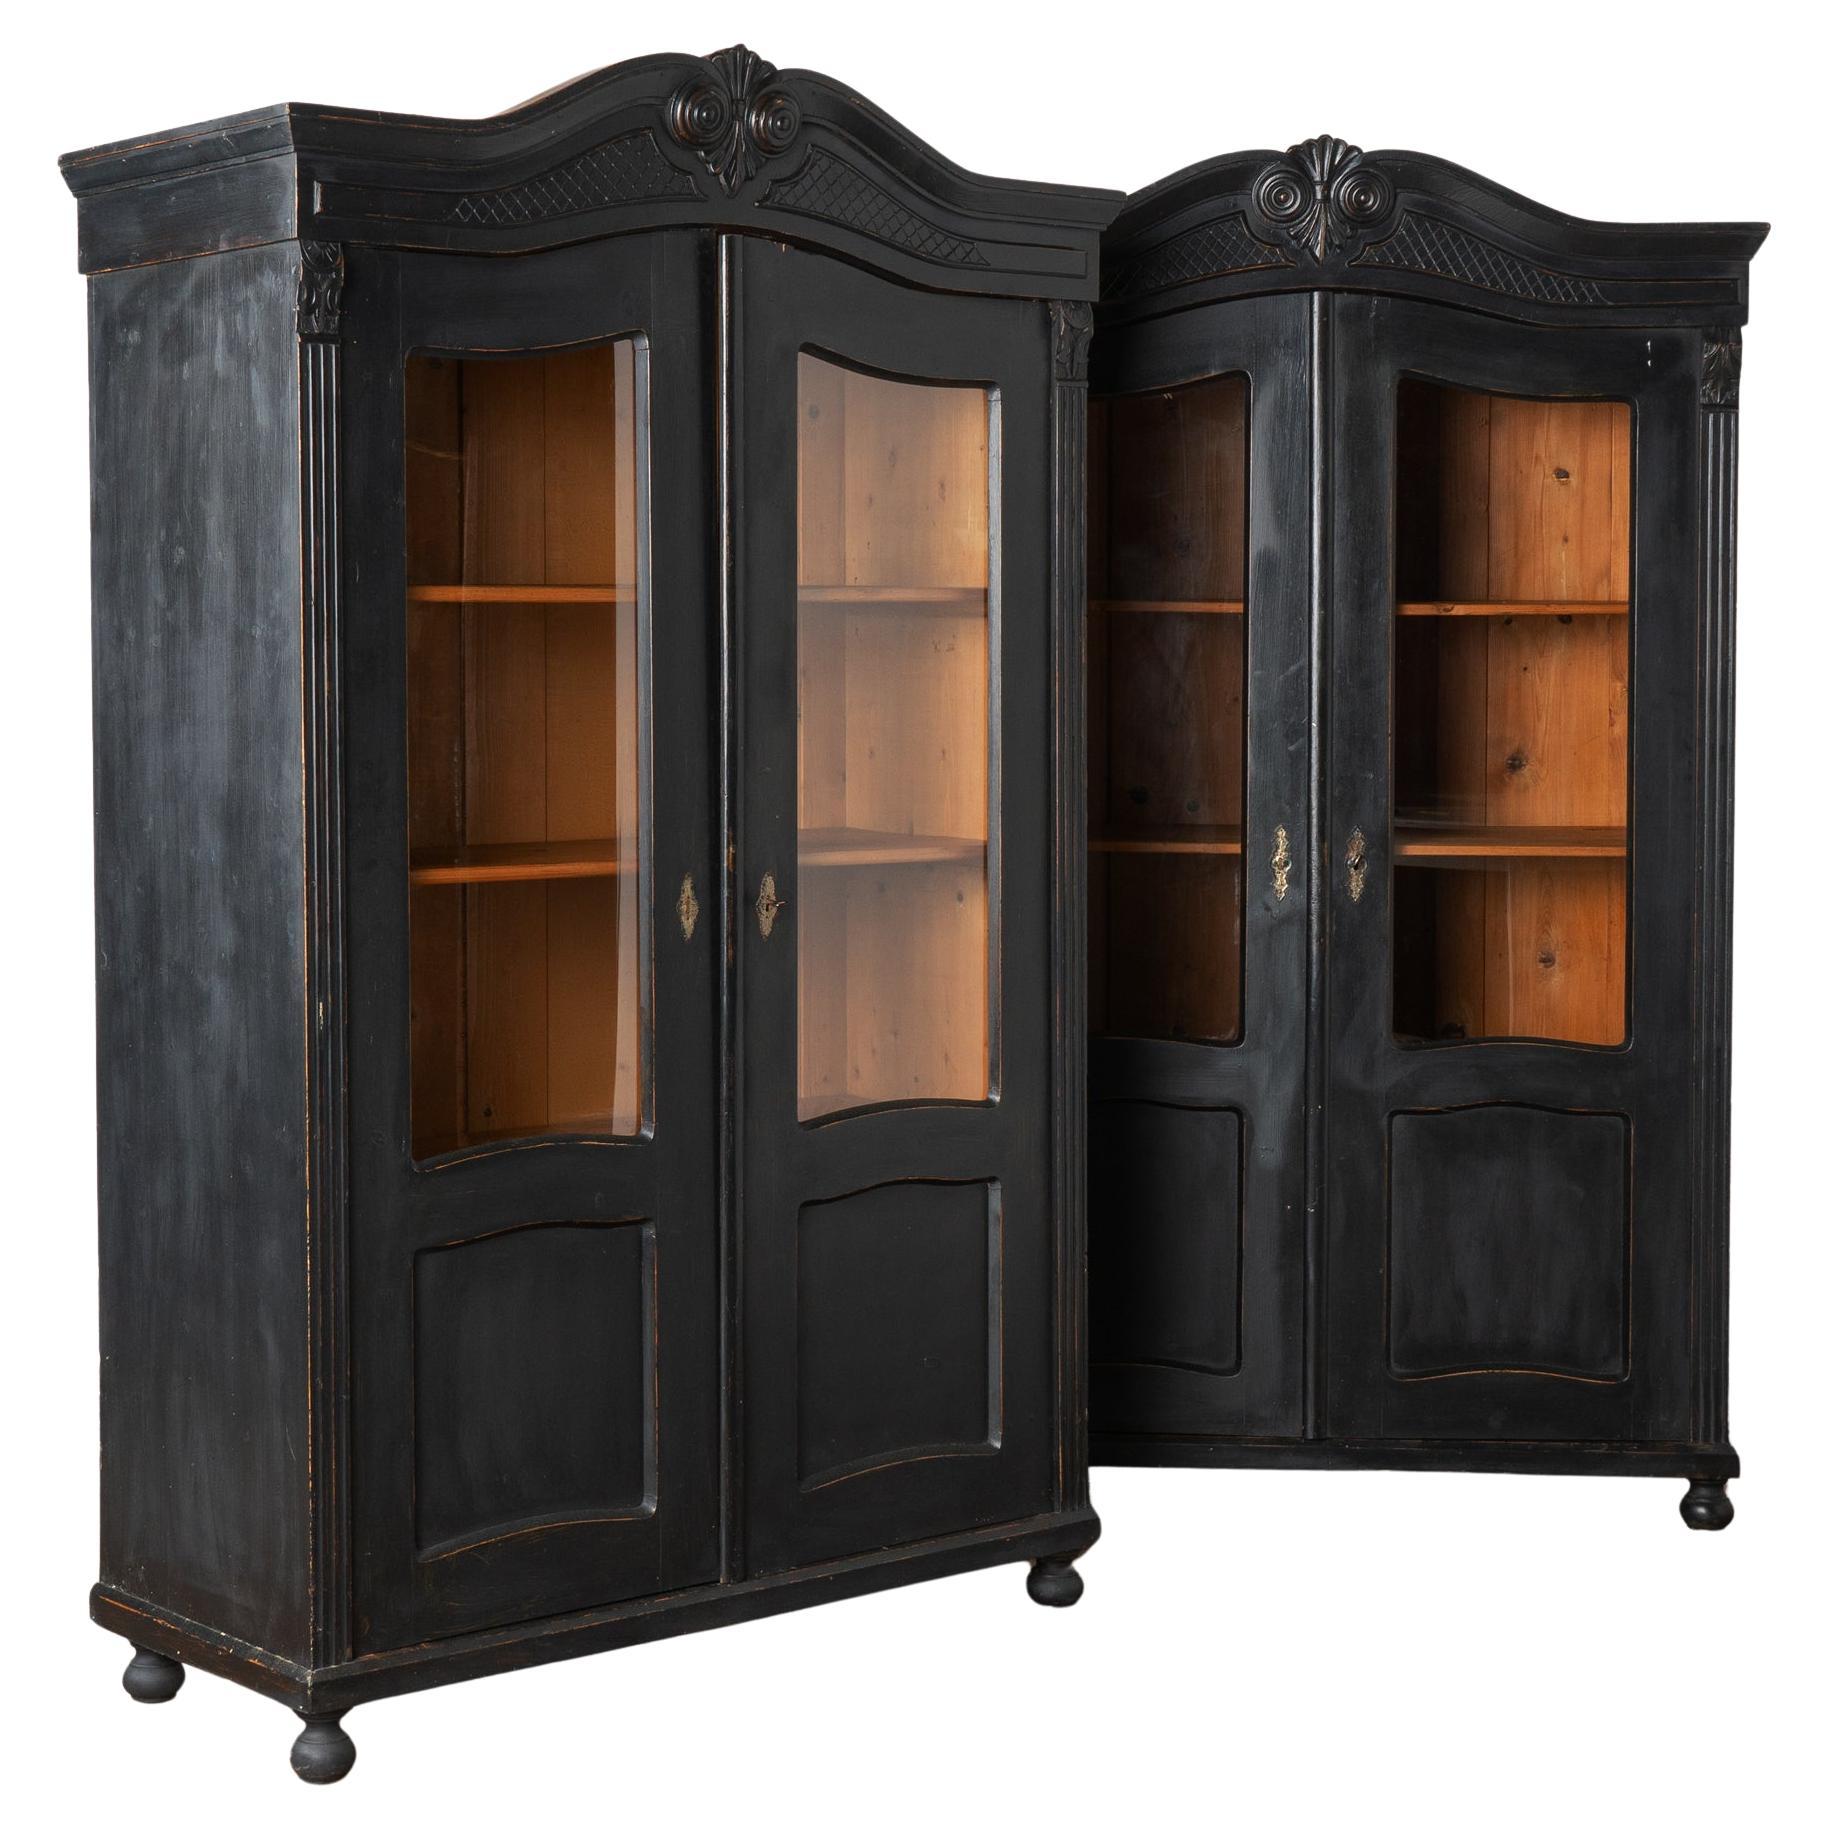 Pair, Black Painted Pine Bookcases Display Cabinets, Hungary circa 1890